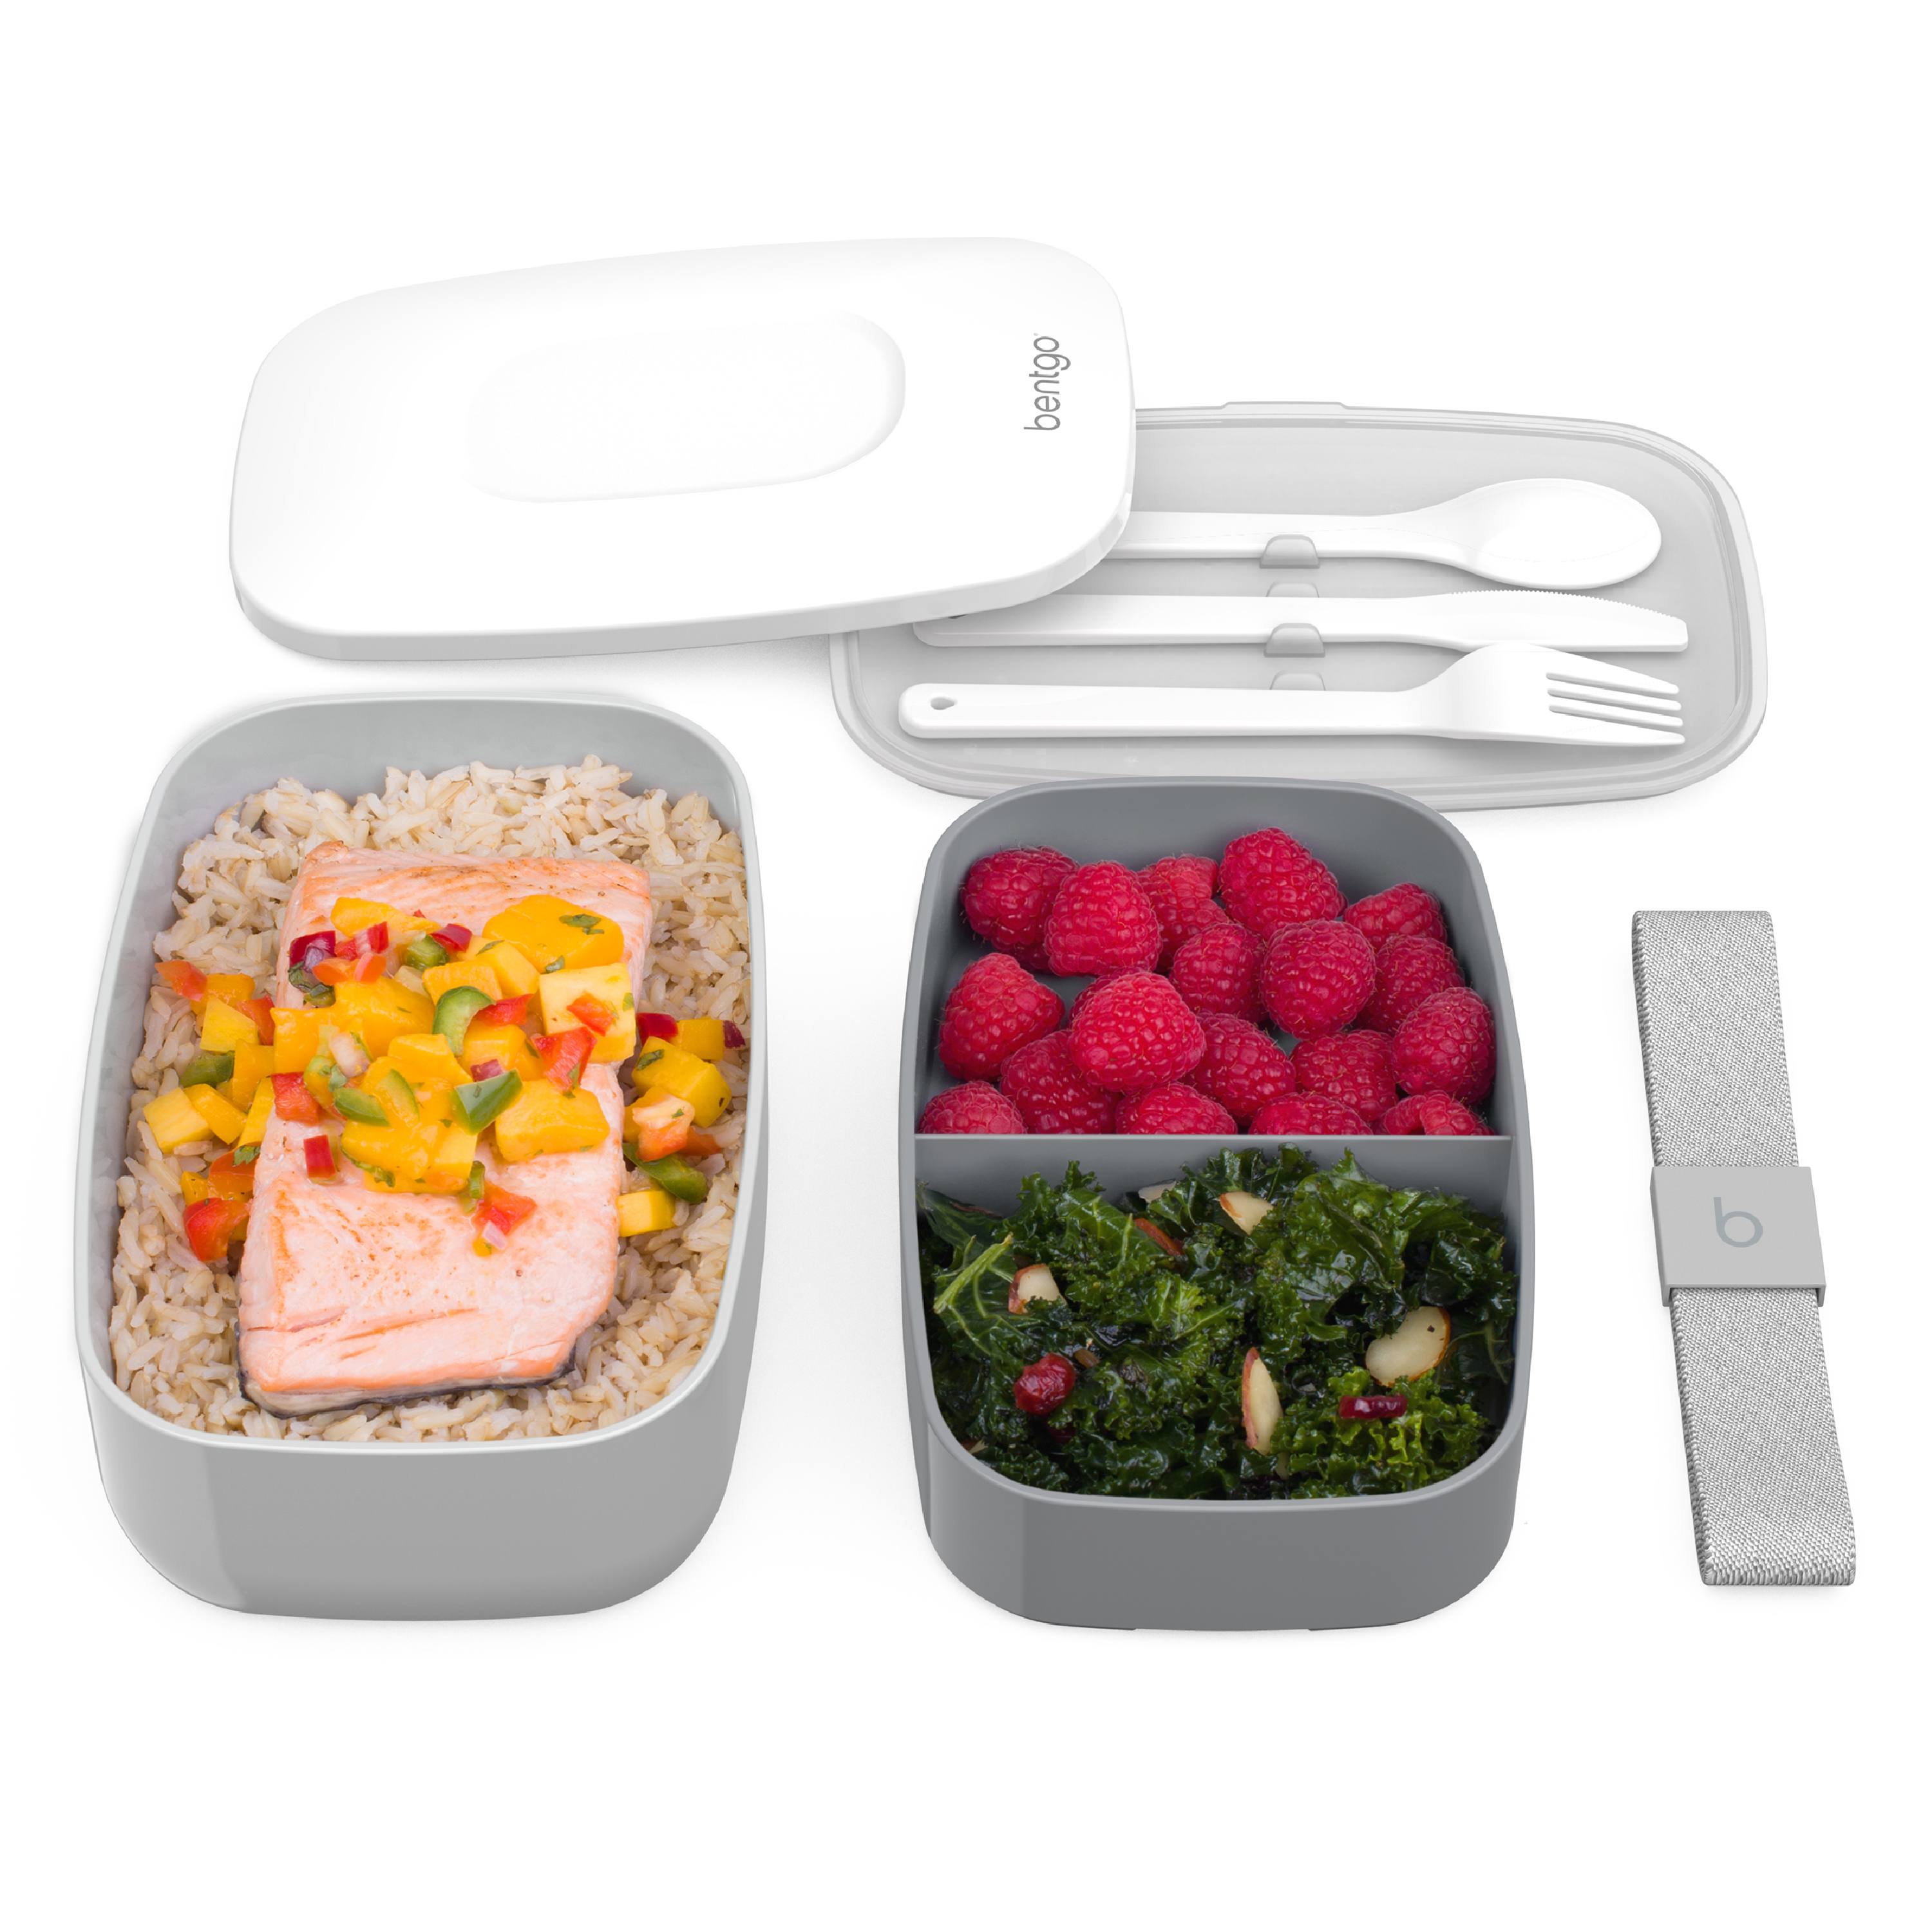 Bentgo Classic (Gray) - All-in-One Stackable Lunch Box Solution - Sleek and Modern Bento Box Design Includes 2 Stackable Containers, Built-in Plastic Silverware, and Sealing Strap - image 2 of 6